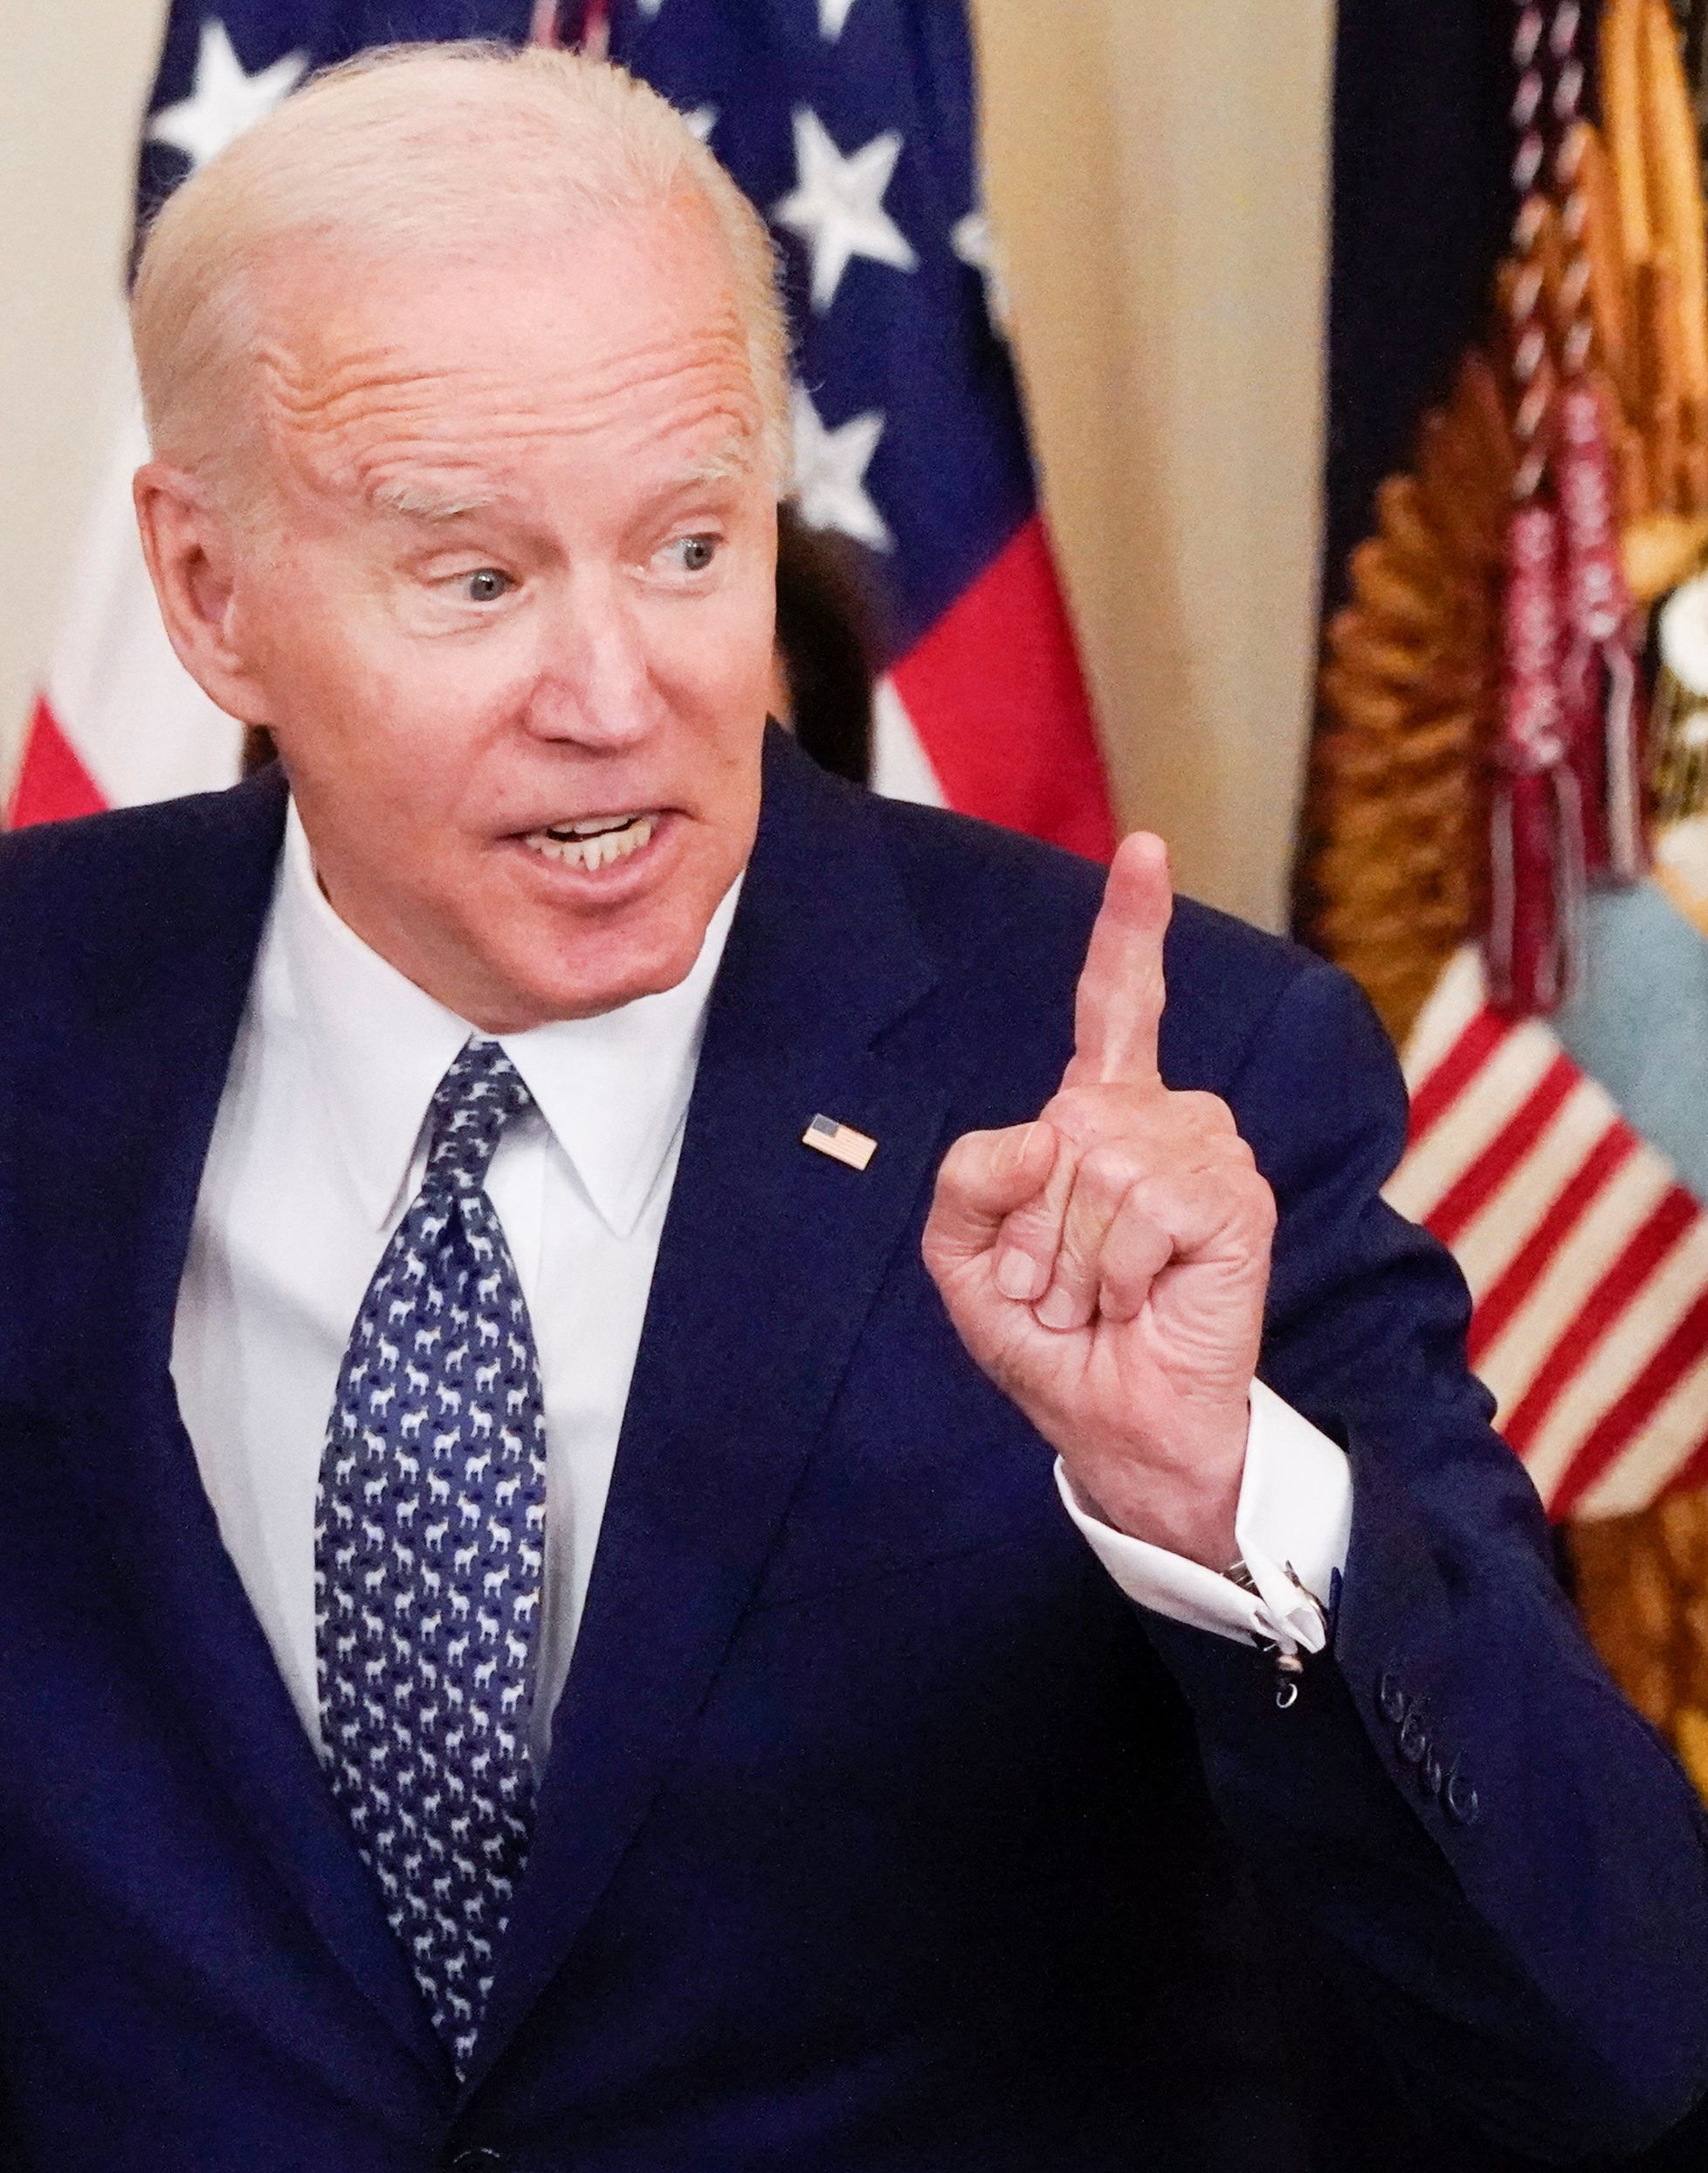 Possible to beat recession: Biden